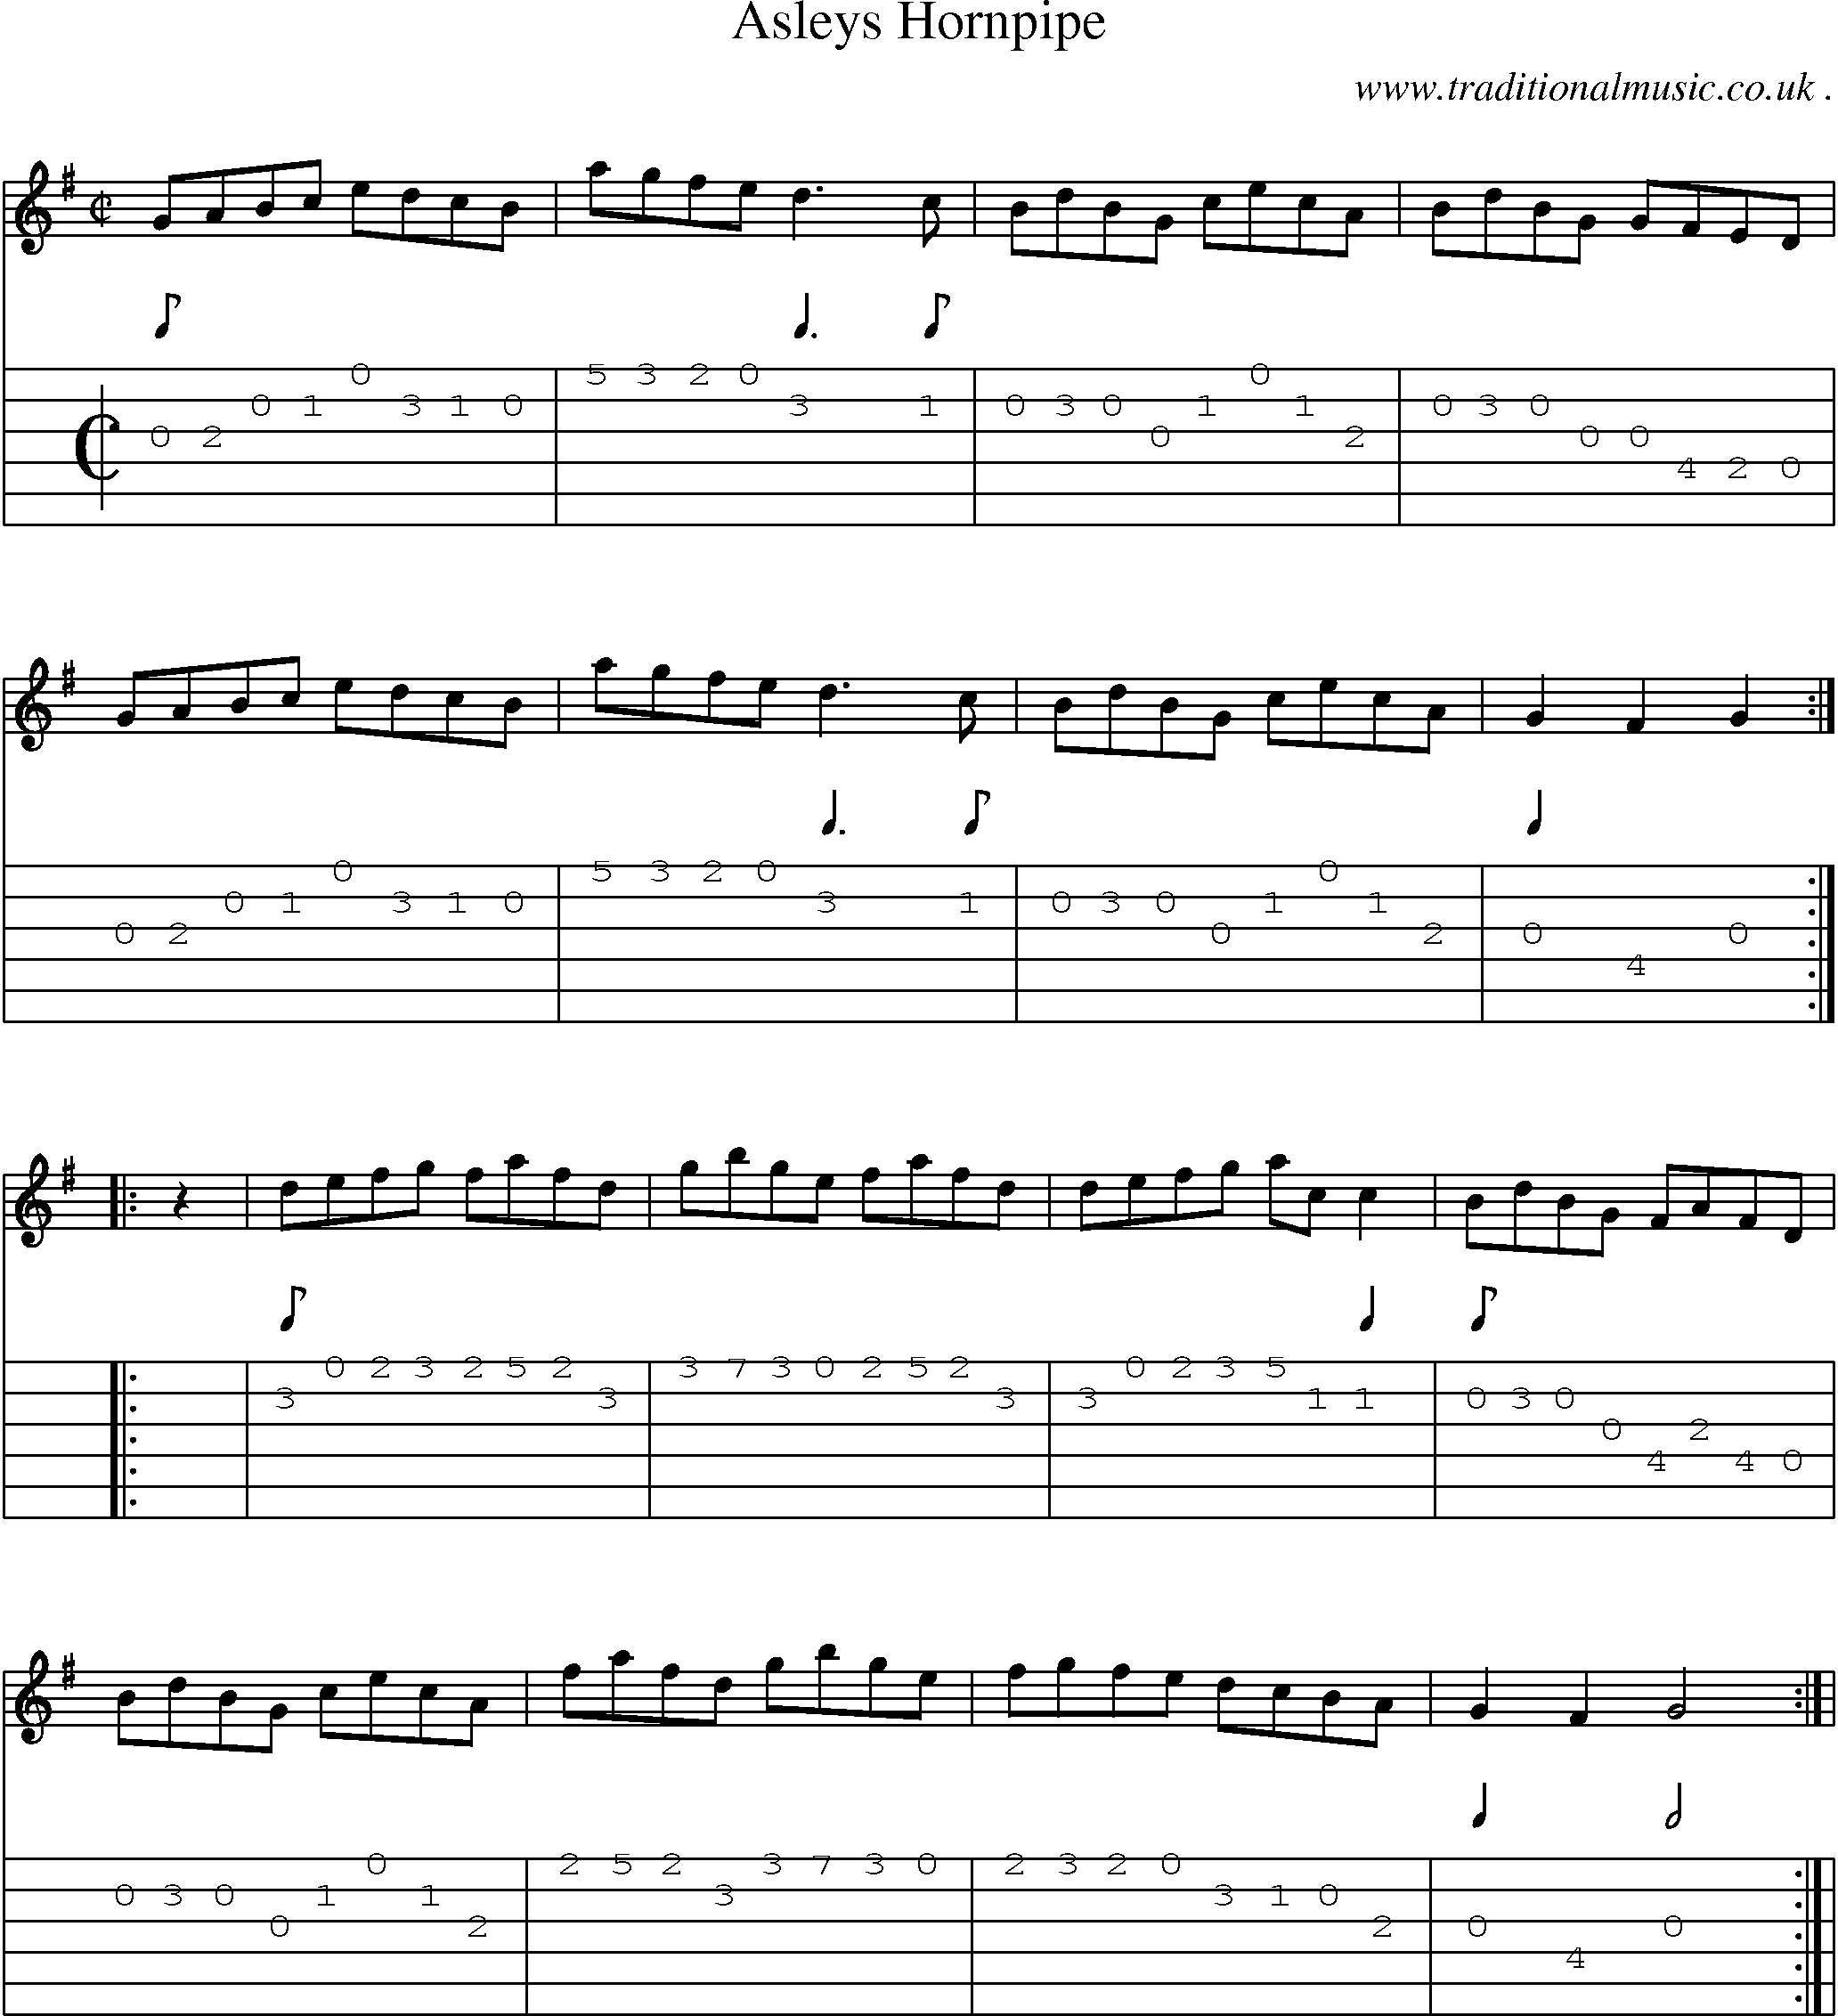 Sheet-Music and Guitar Tabs for Asleys Hornpipe